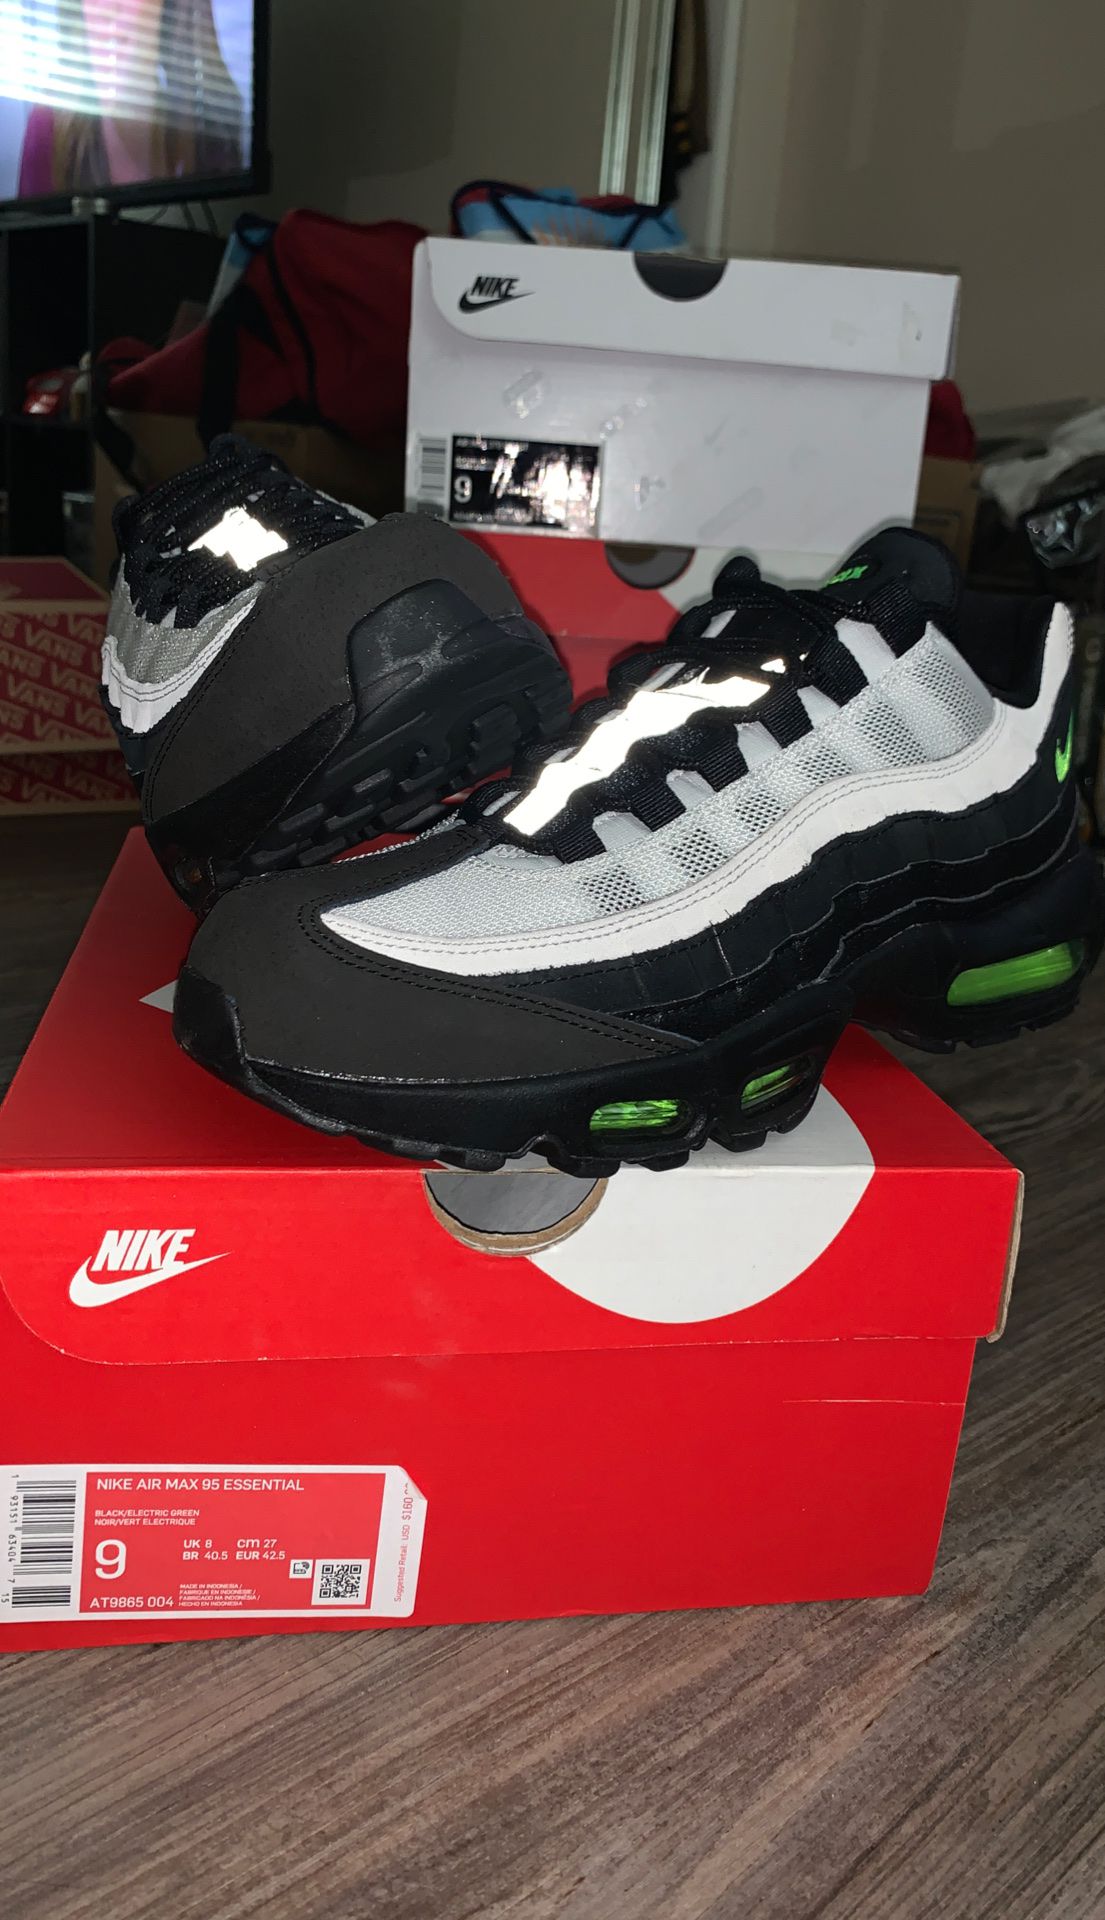 BRAND NEW NIKE AIR MAX 95 ESSENTIAL SIZE 9 SHOES